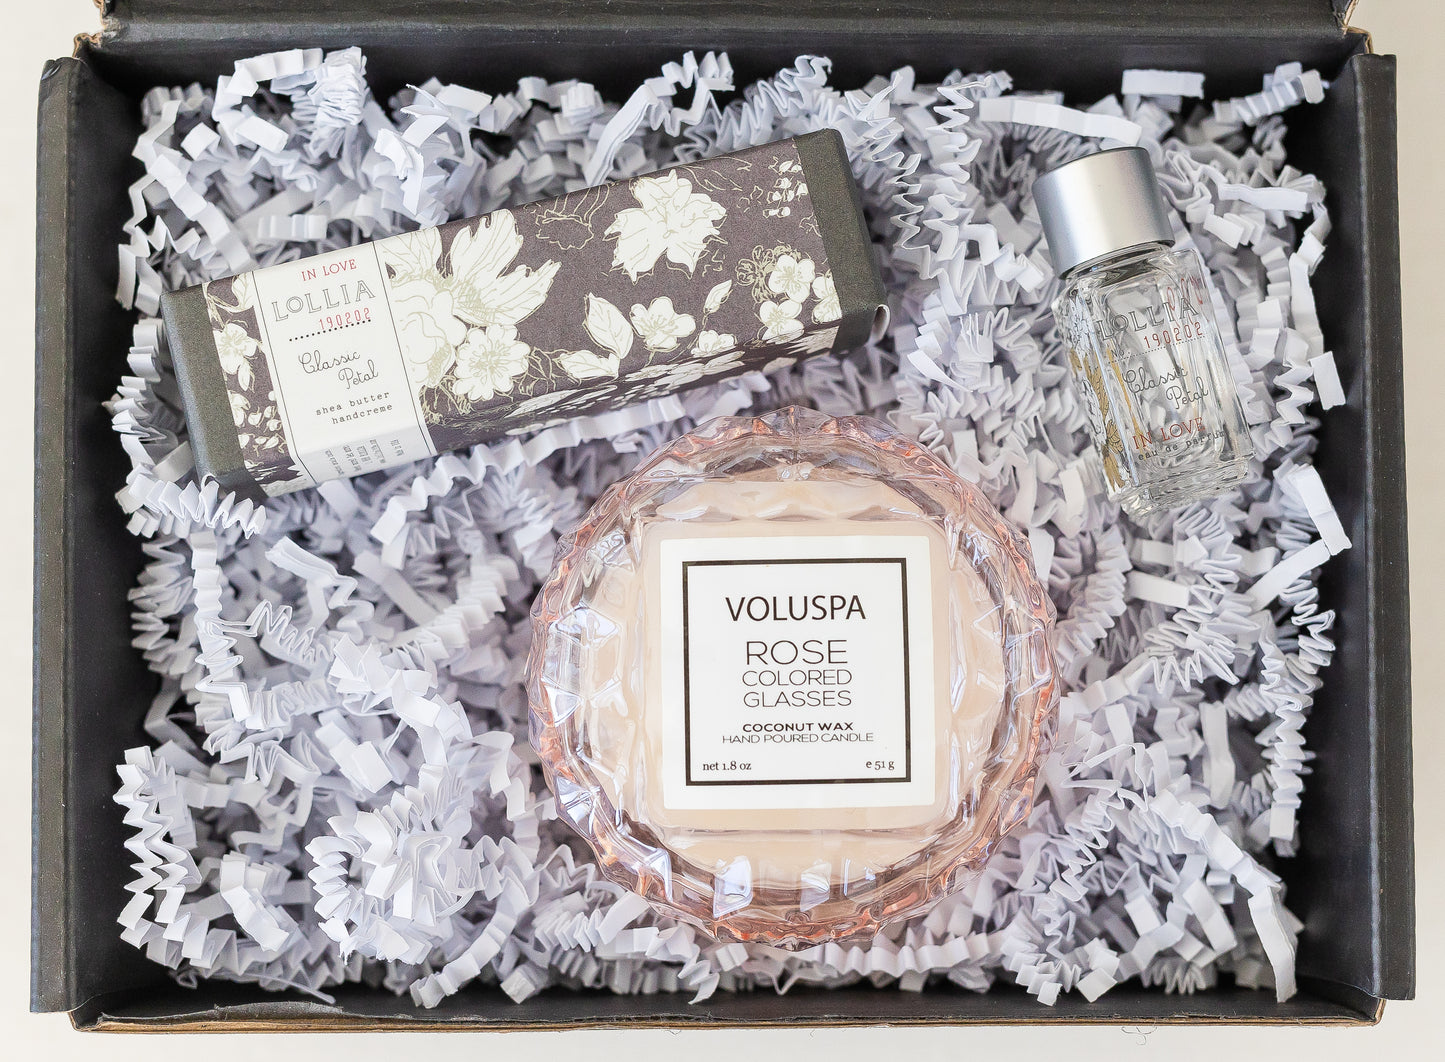 Thinking of You Mini Luxe Beauty Box